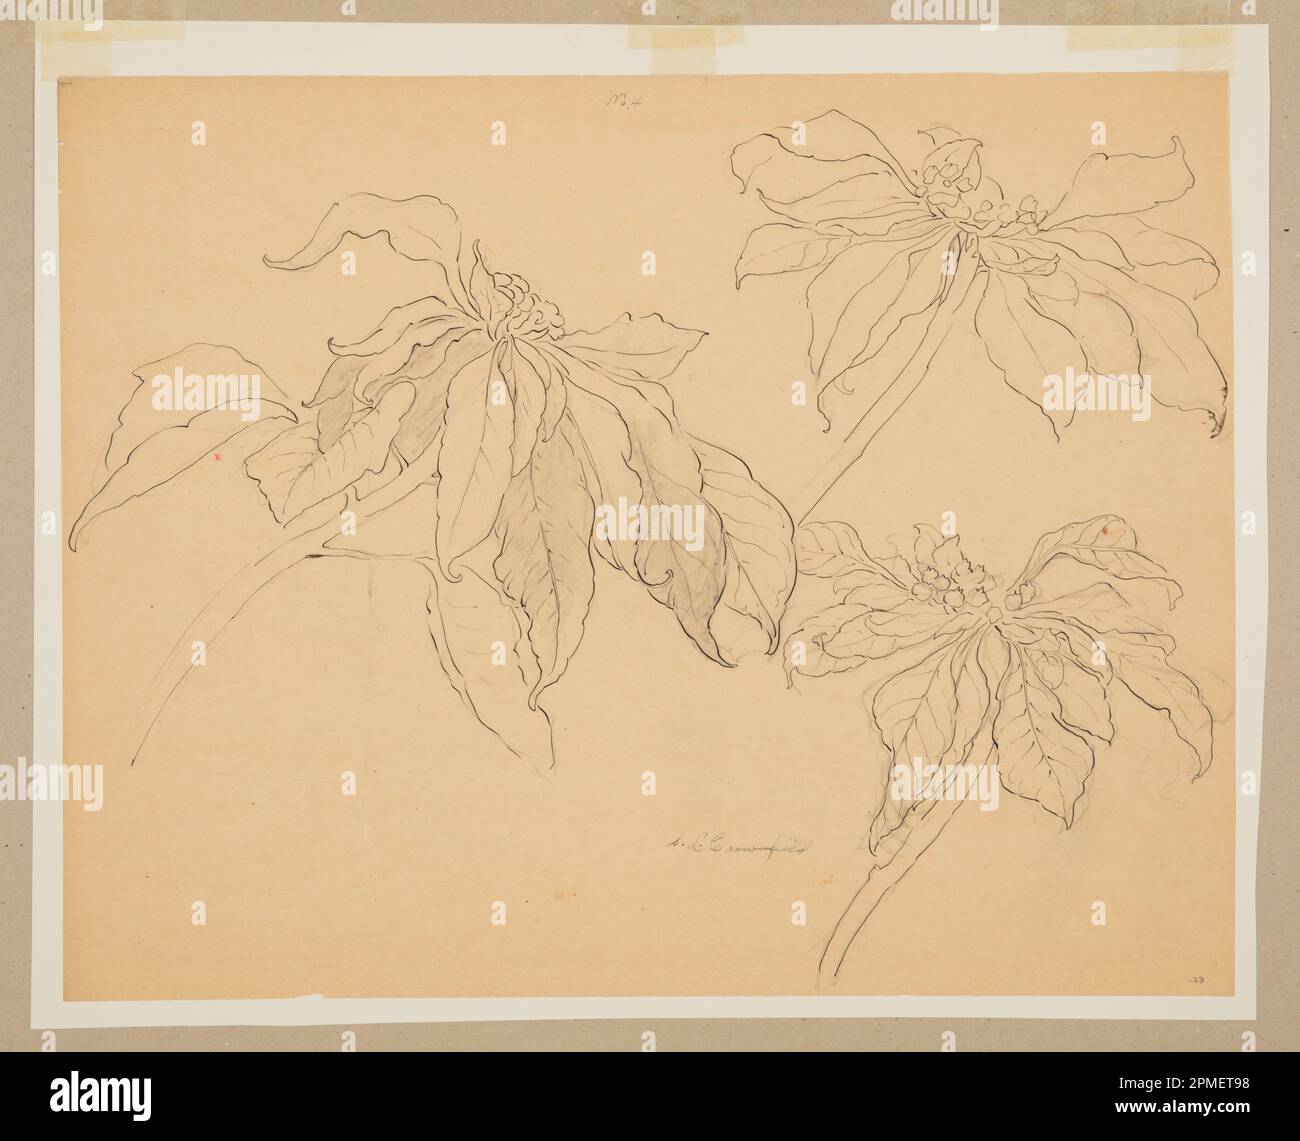 Drawing, Study of Poinsettias; Designed by Sophia L. Crownfield (American, 1862–1929); USA; graphite, pen and ink on tracing paper; 47.6 × 60.5 cm (18 3/4 × 23 13/16 in.) Mat: 76.2 × 101.6 cm (30 × 40 in.) Stock Photo